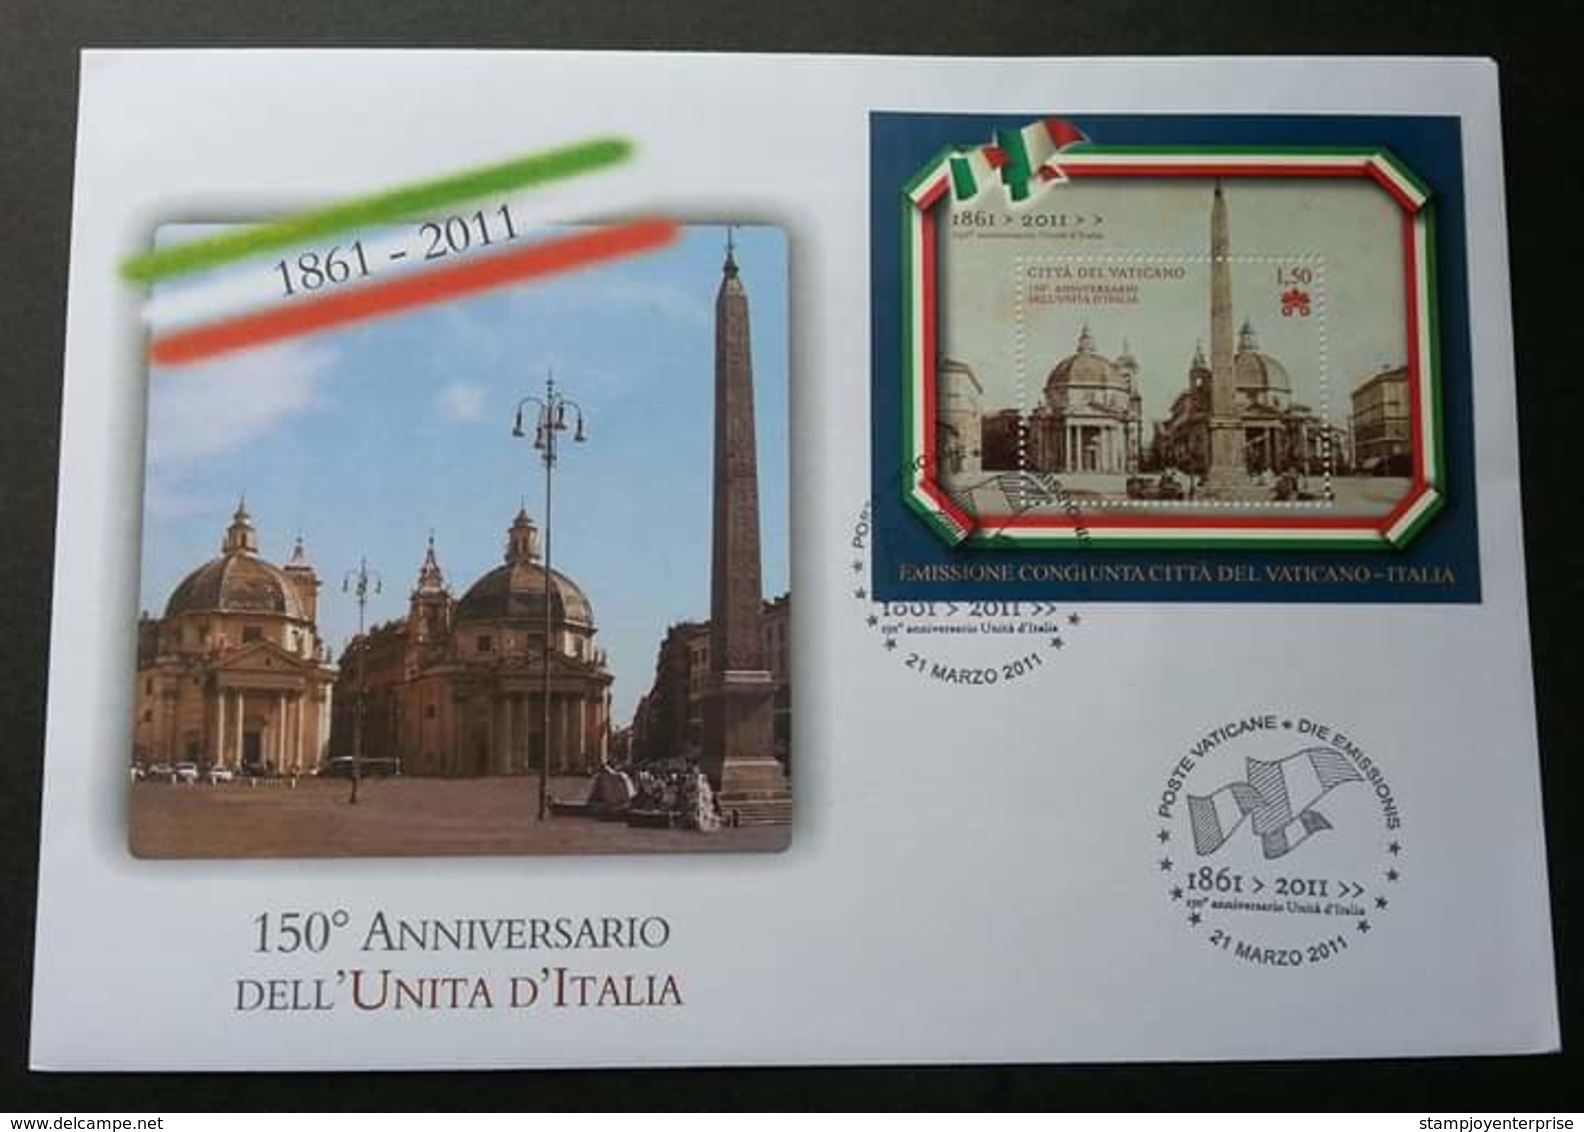 Vatican - Italy Joint Issue 150th Anniversary Of Italy Unity 2011 (miniature FDC) - Brieven En Documenten